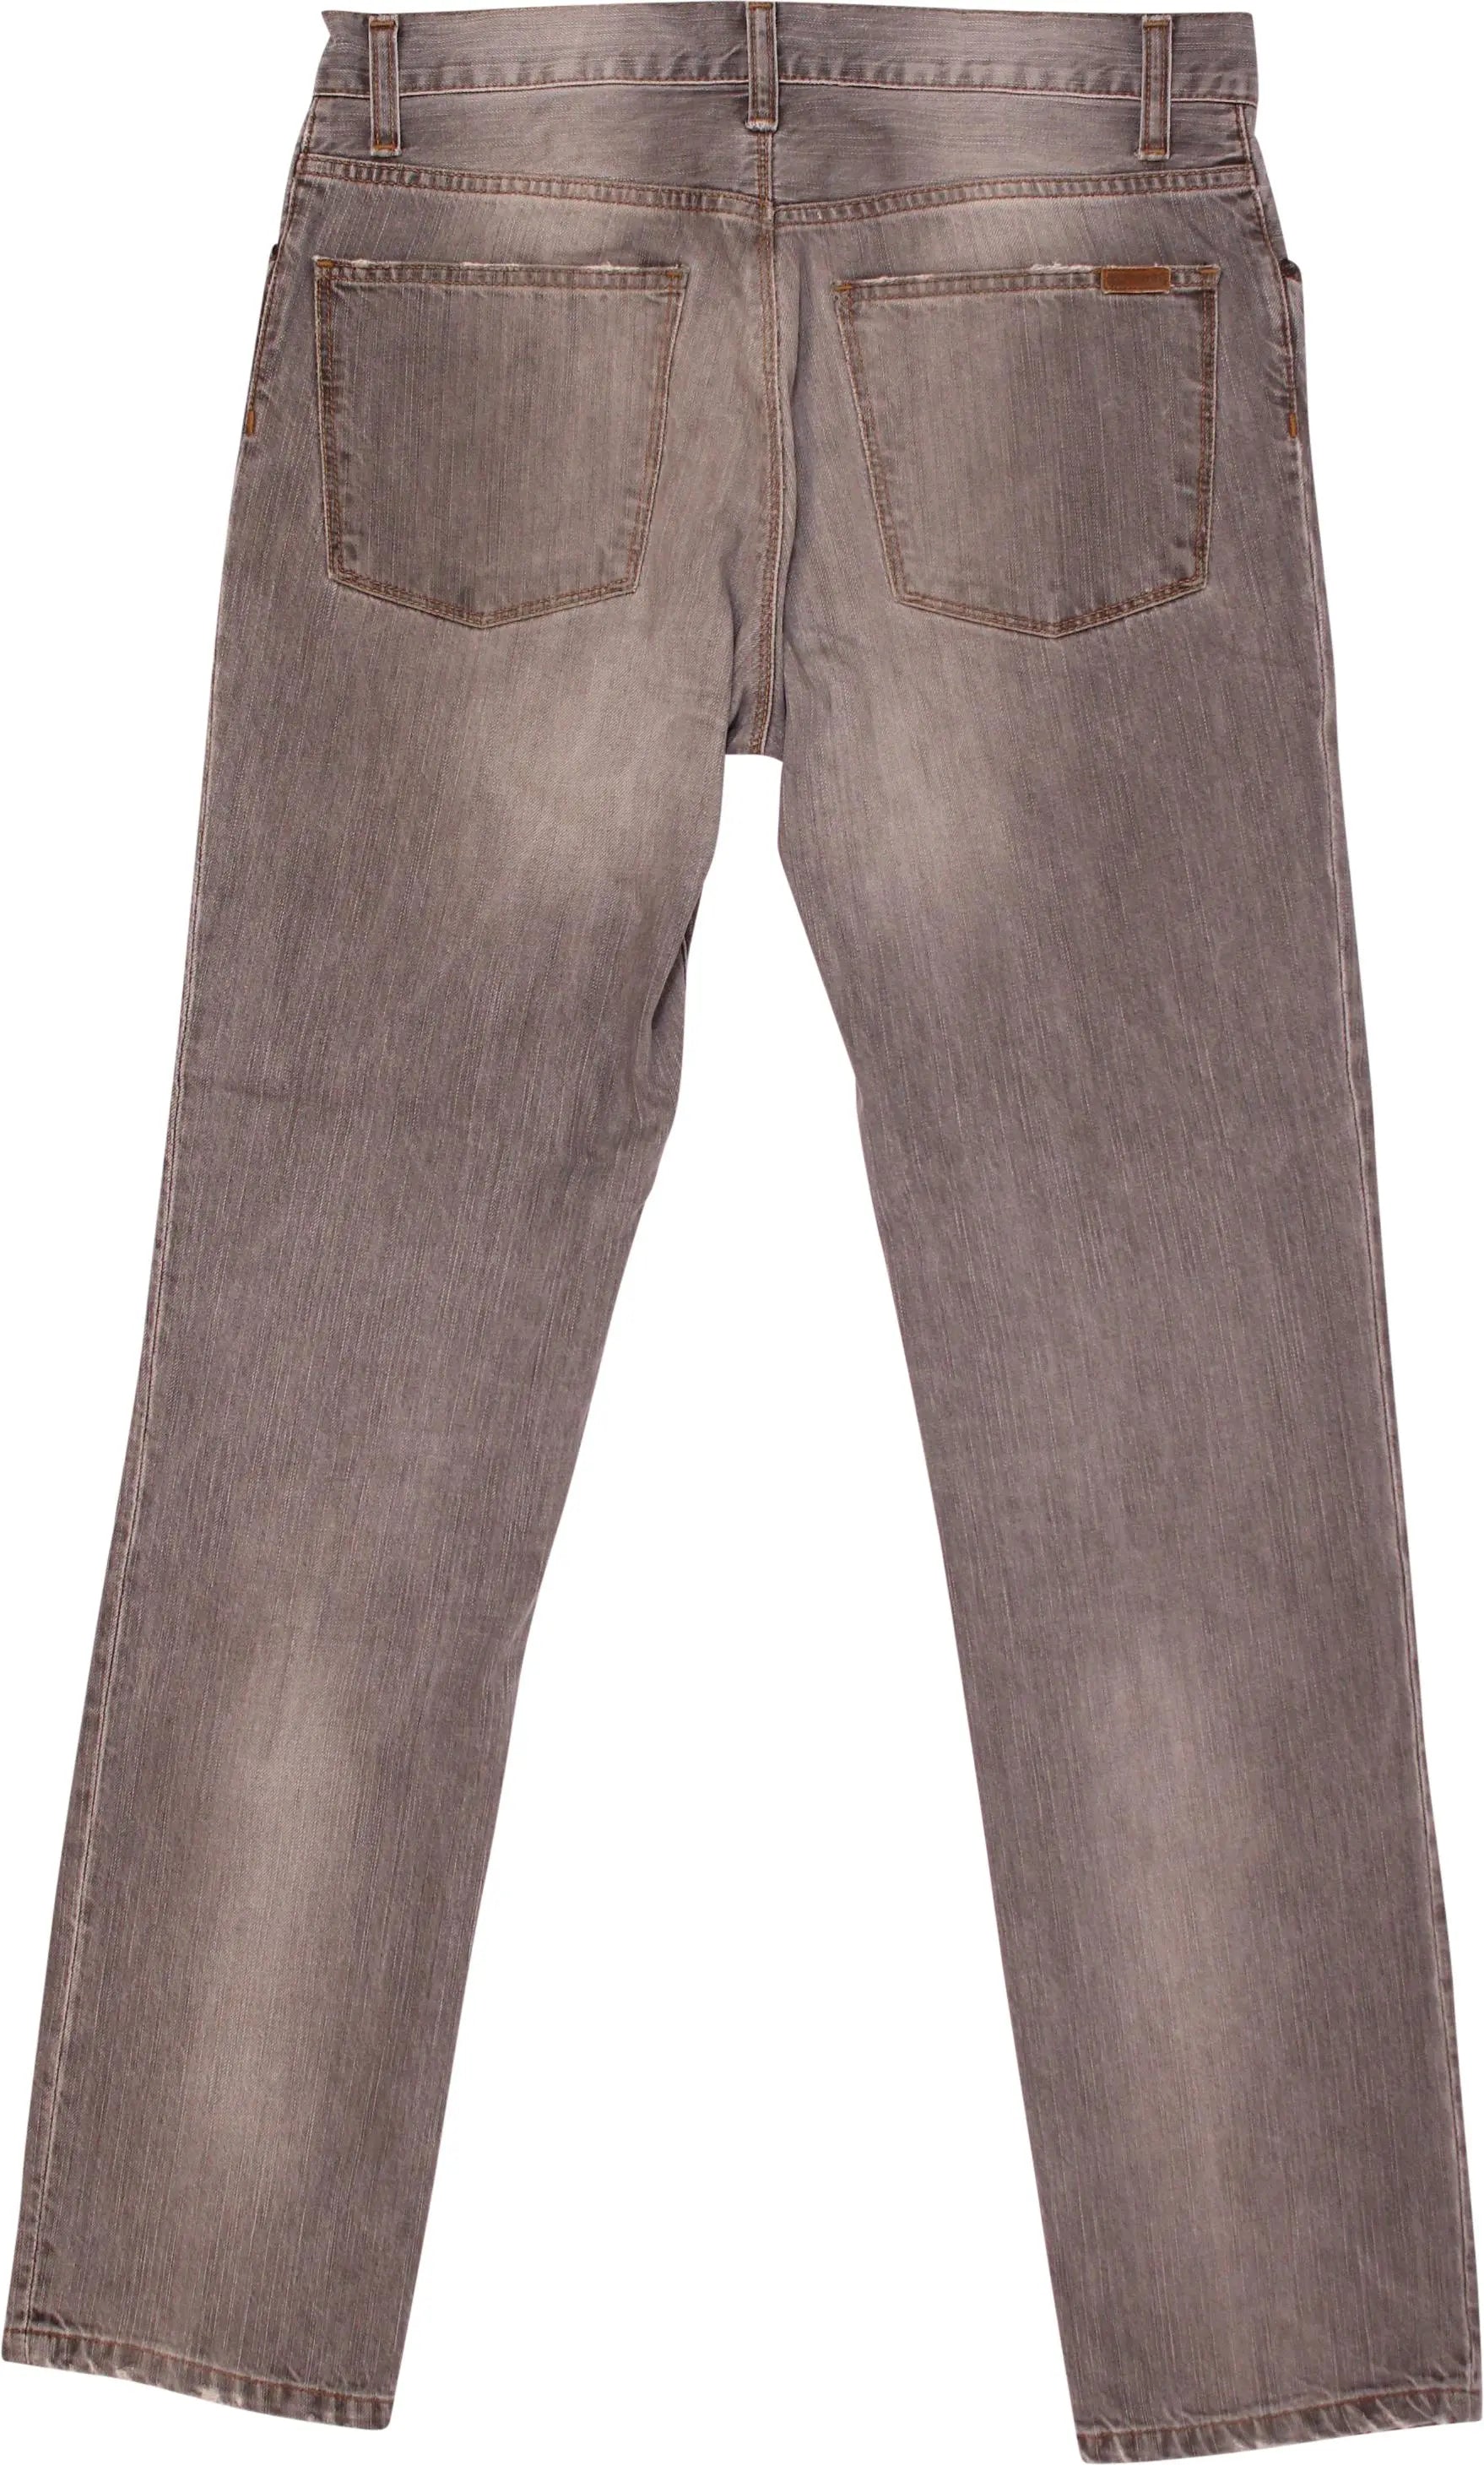 Carhartt - Grey Slim Fit Jeans by Carhartt- ThriftTale.com - Vintage and second handclothing